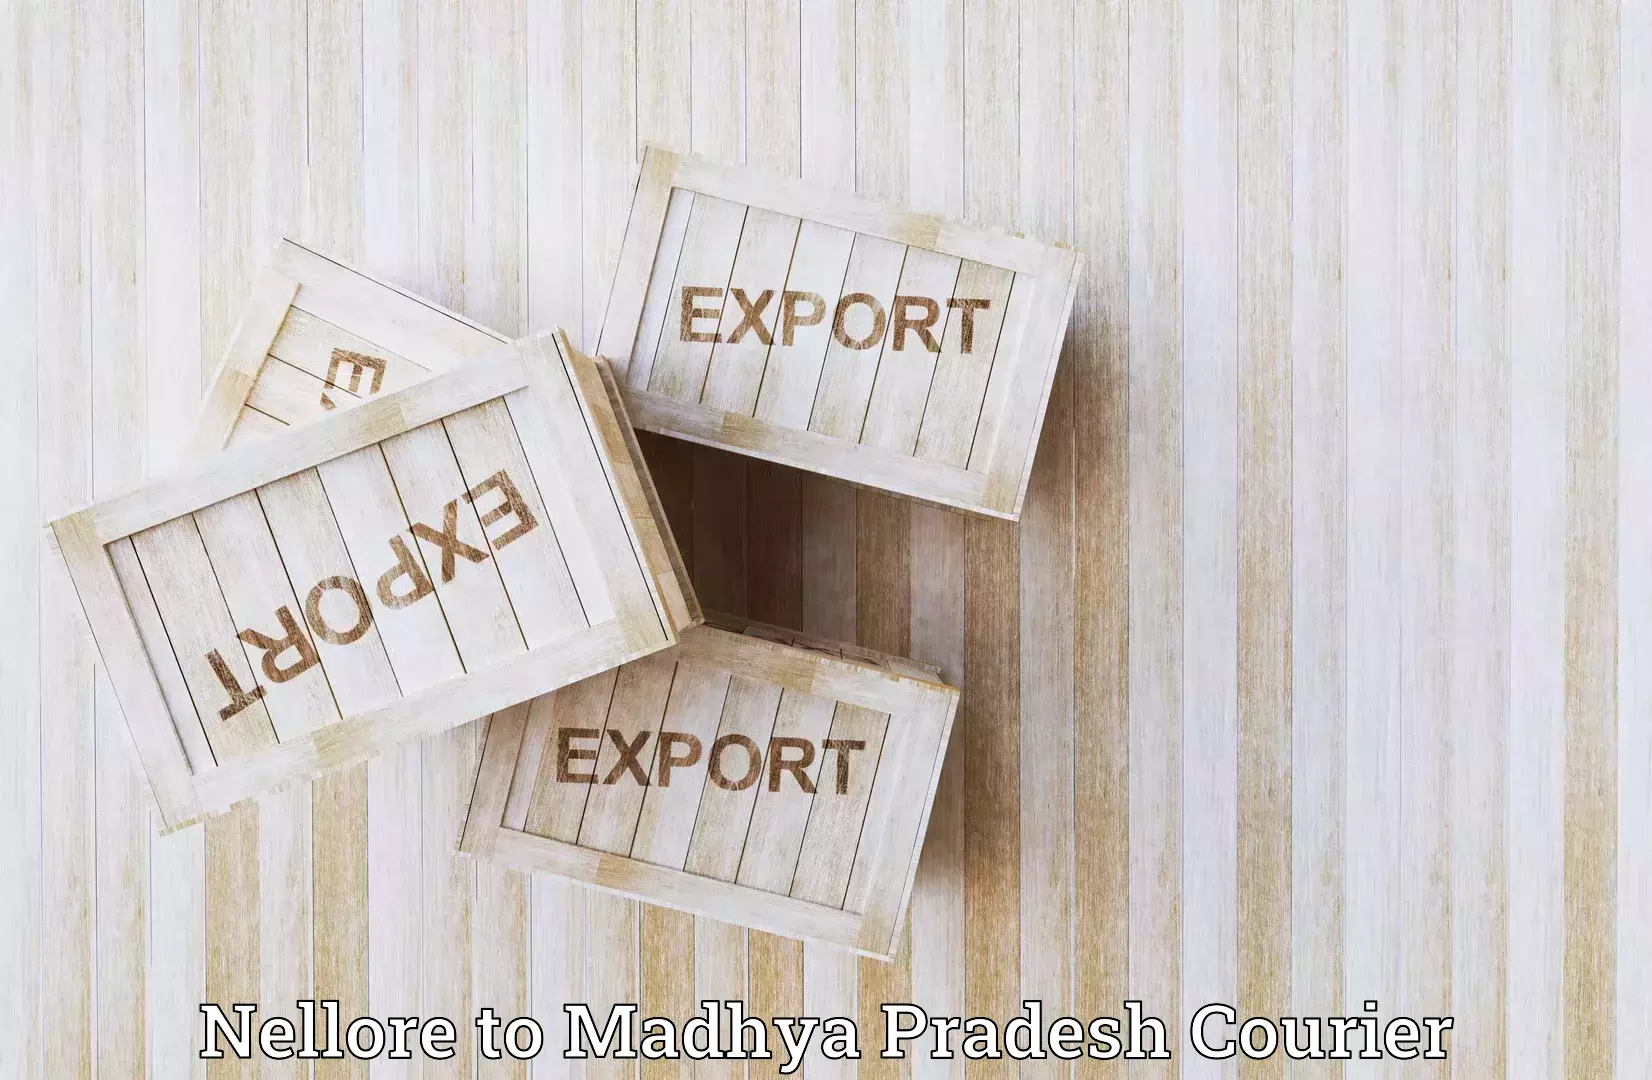 Retail shipping solutions Nellore to Rampur Naikin